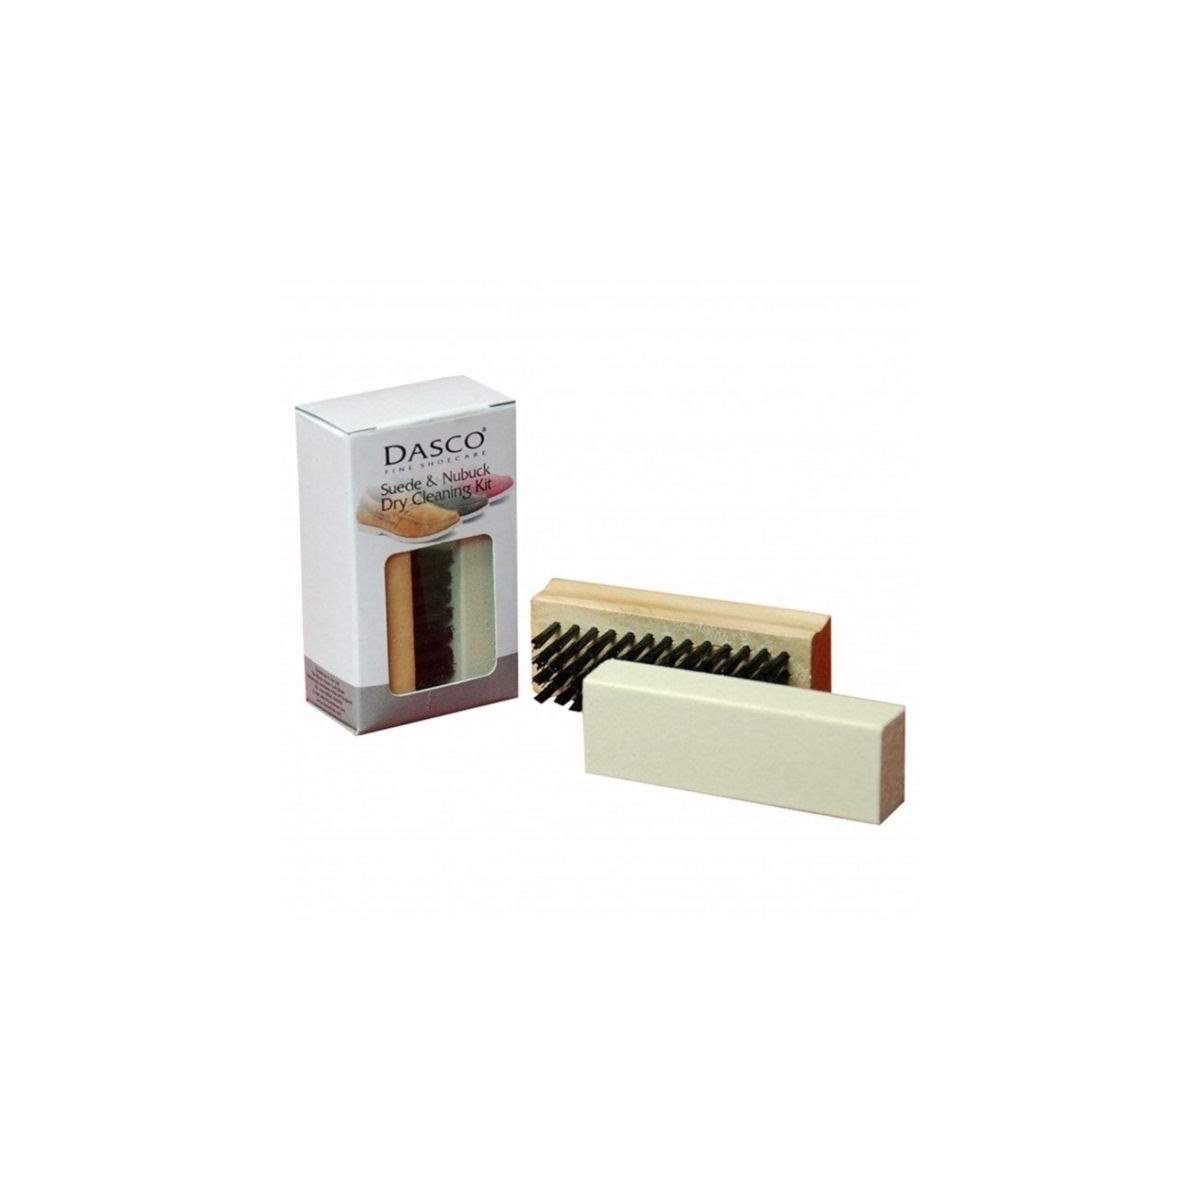 Dasco Fine Shoecare Suede And Nubuck Dry Cleaning Kit